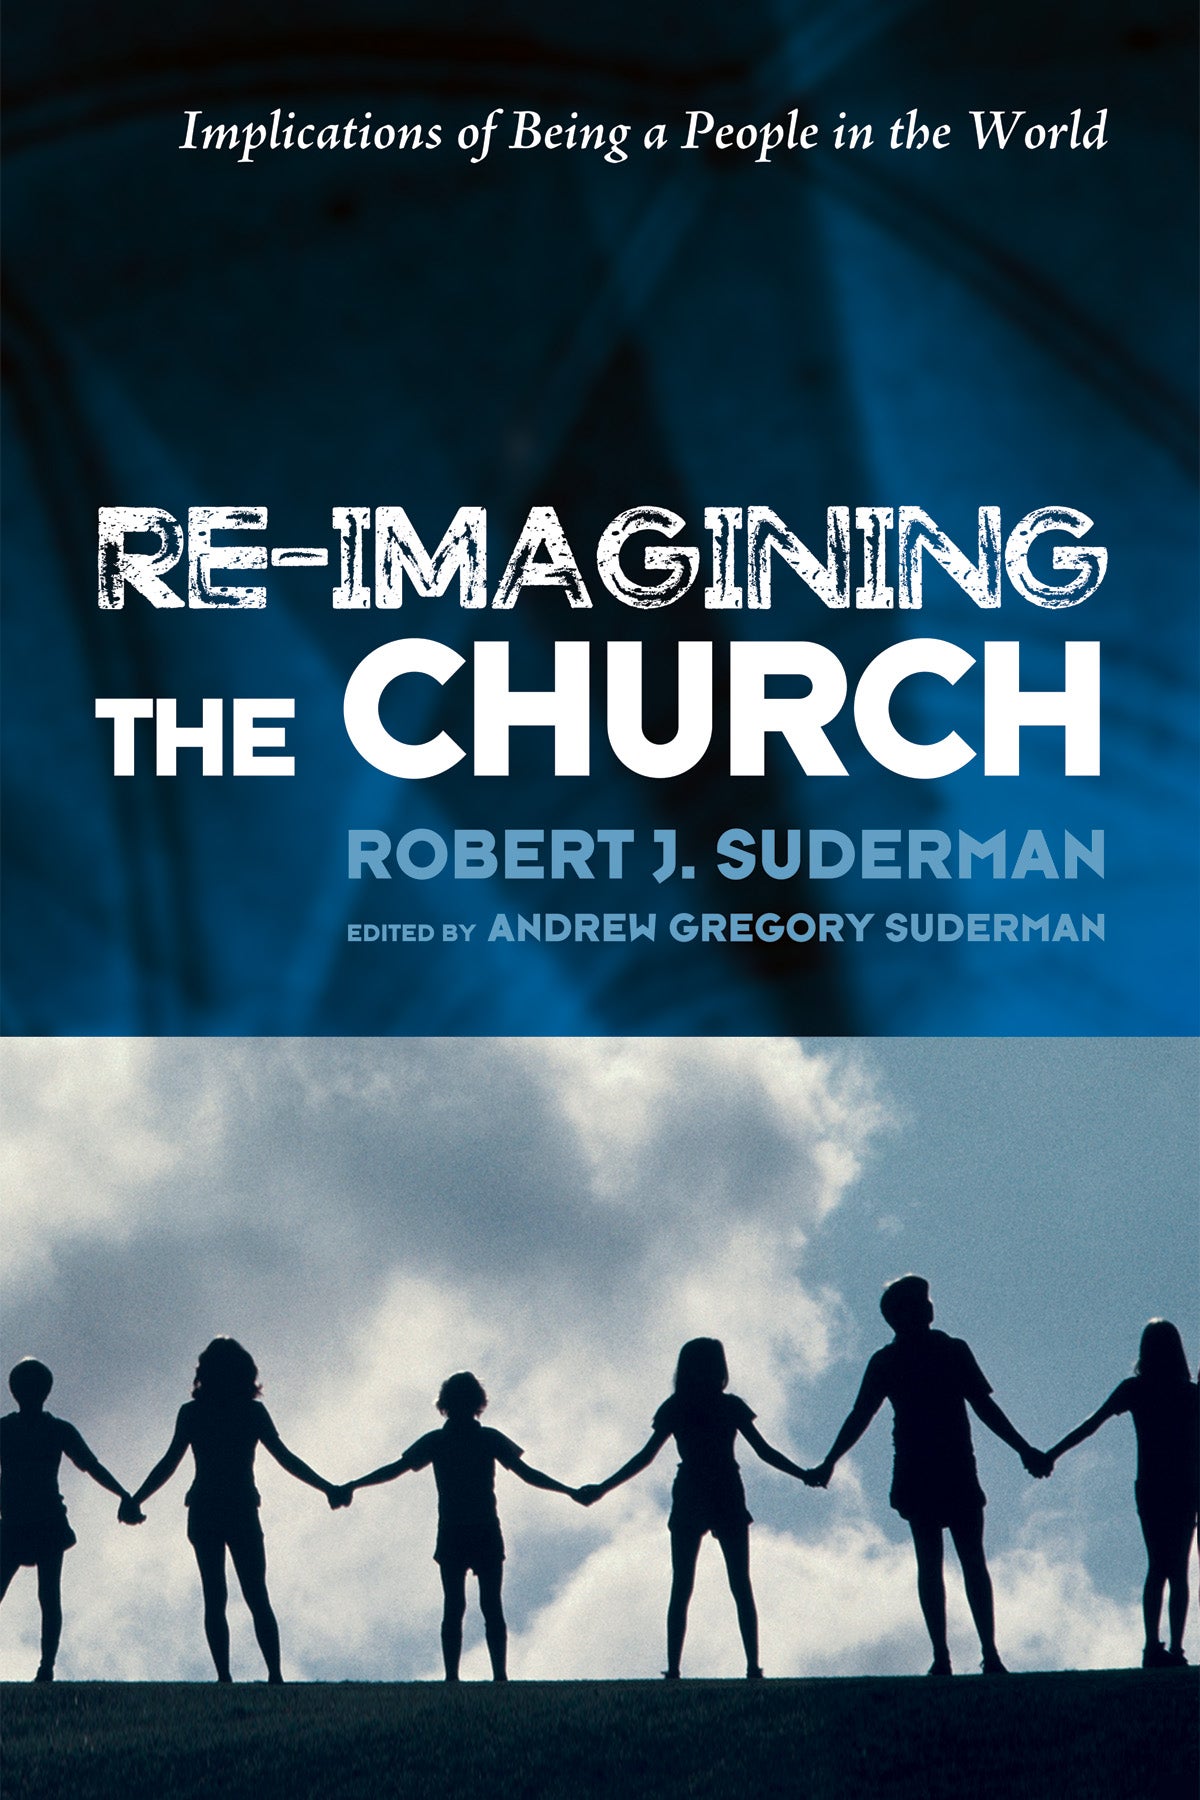 "Re-imagining the Church" book cover art.